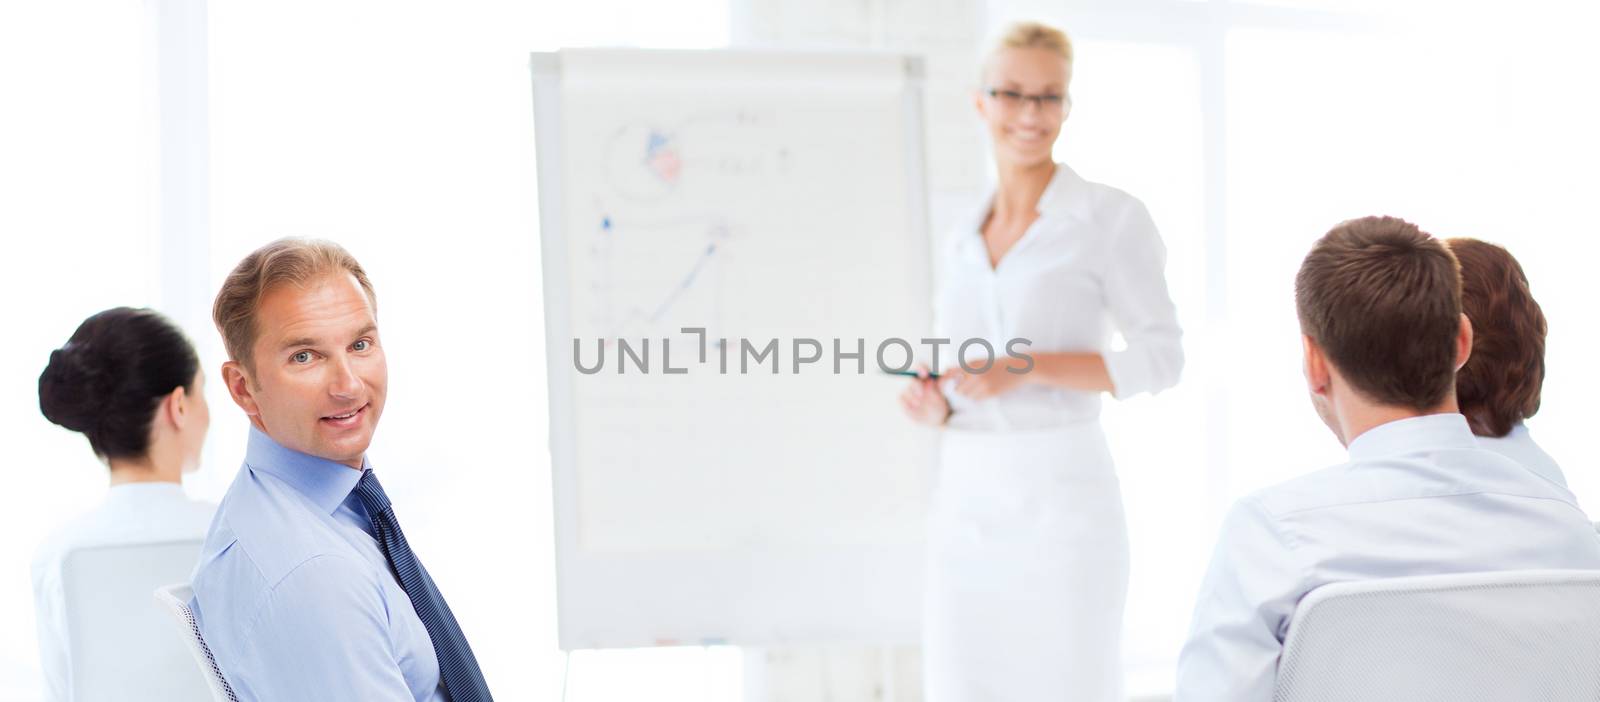 picture of smiling businessman on business meeting in office